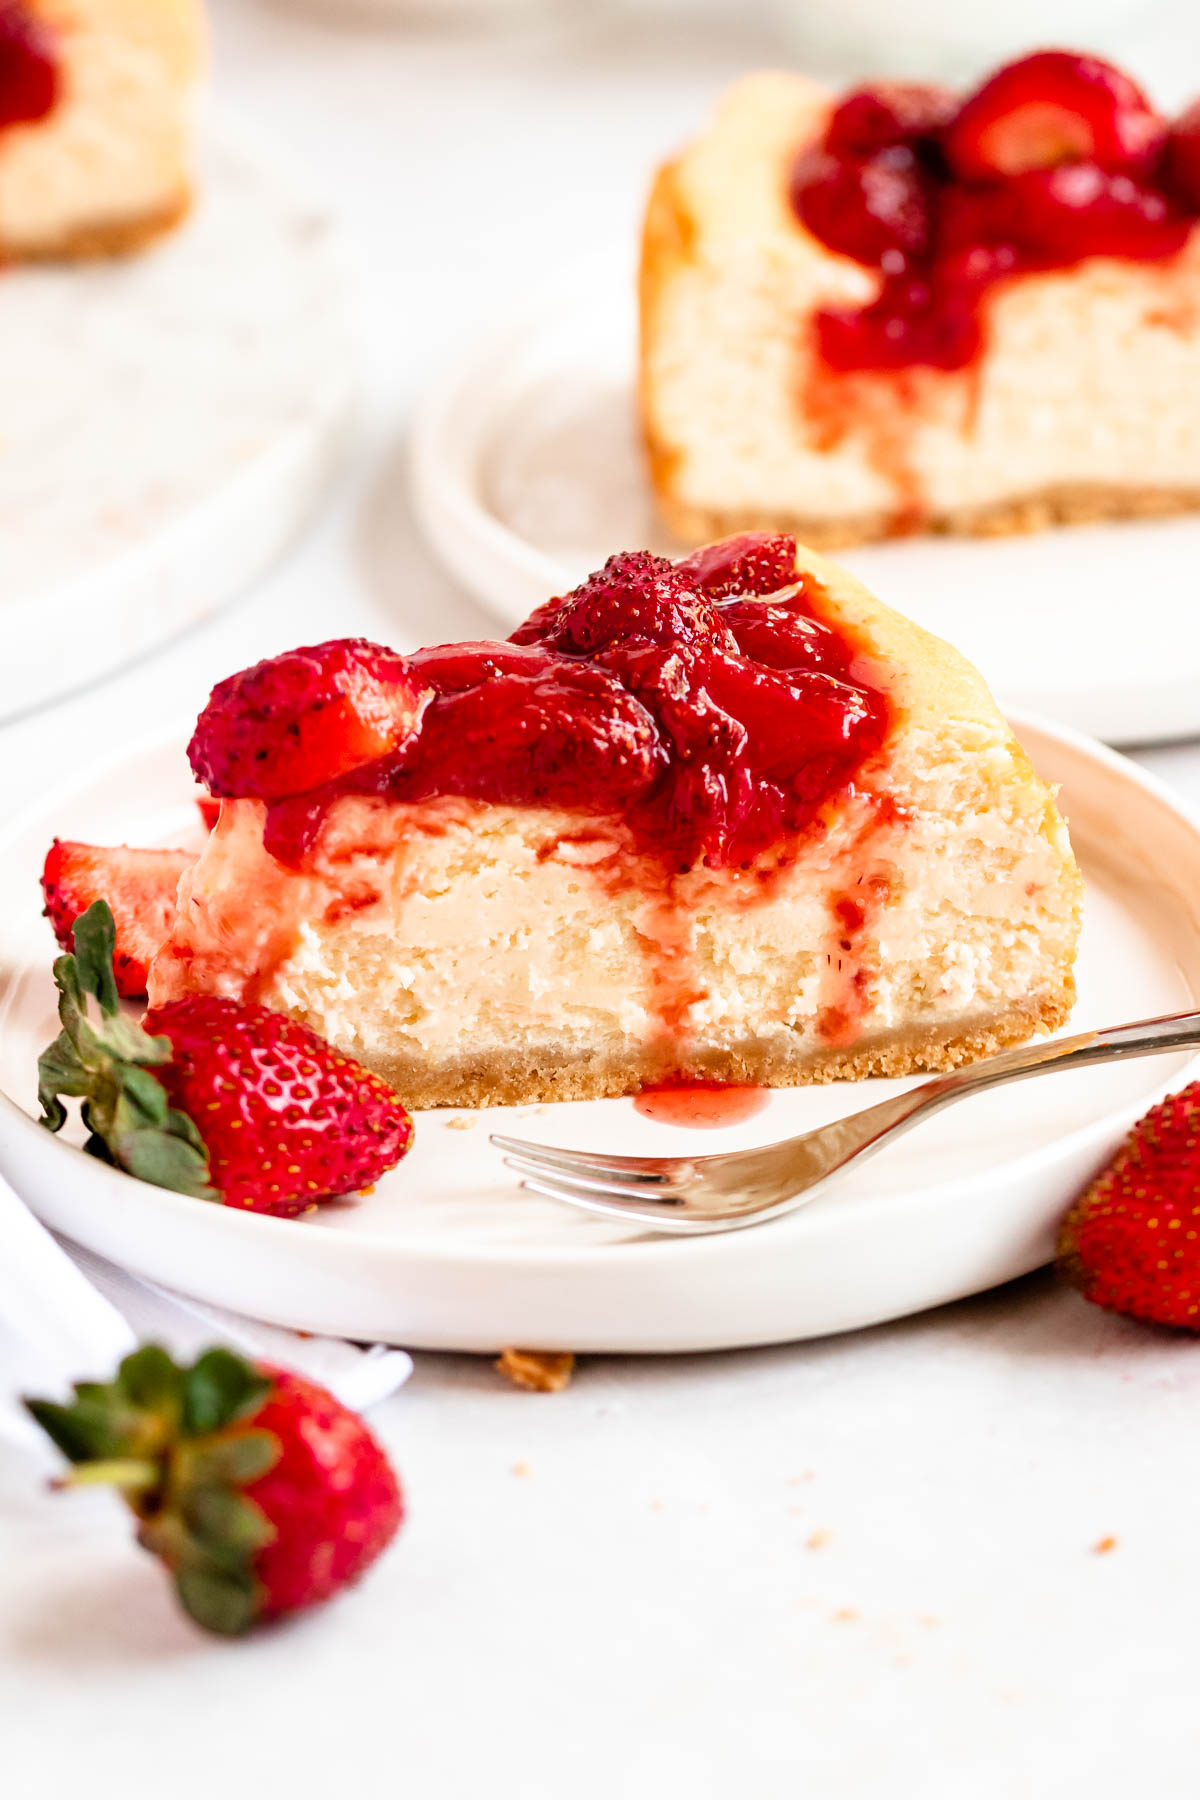 Slice of strawberry cheesecake on a plate.